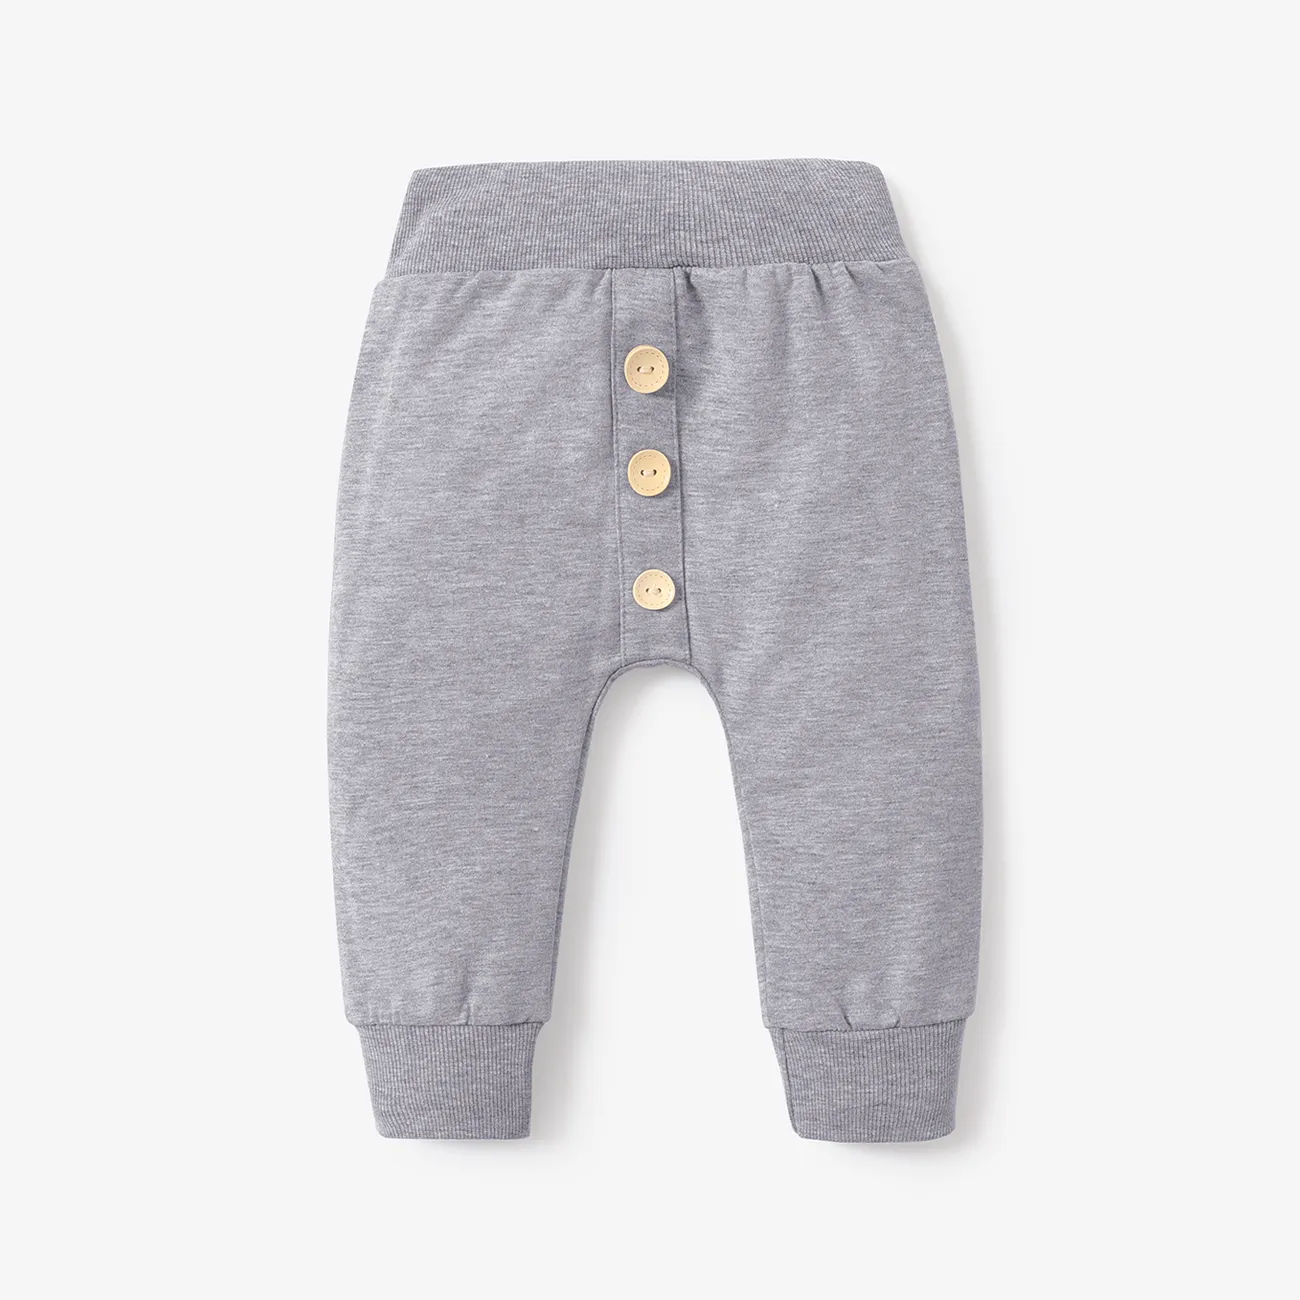 Baby Boy/Girl Button Front Solid Sweatpants  big image 1